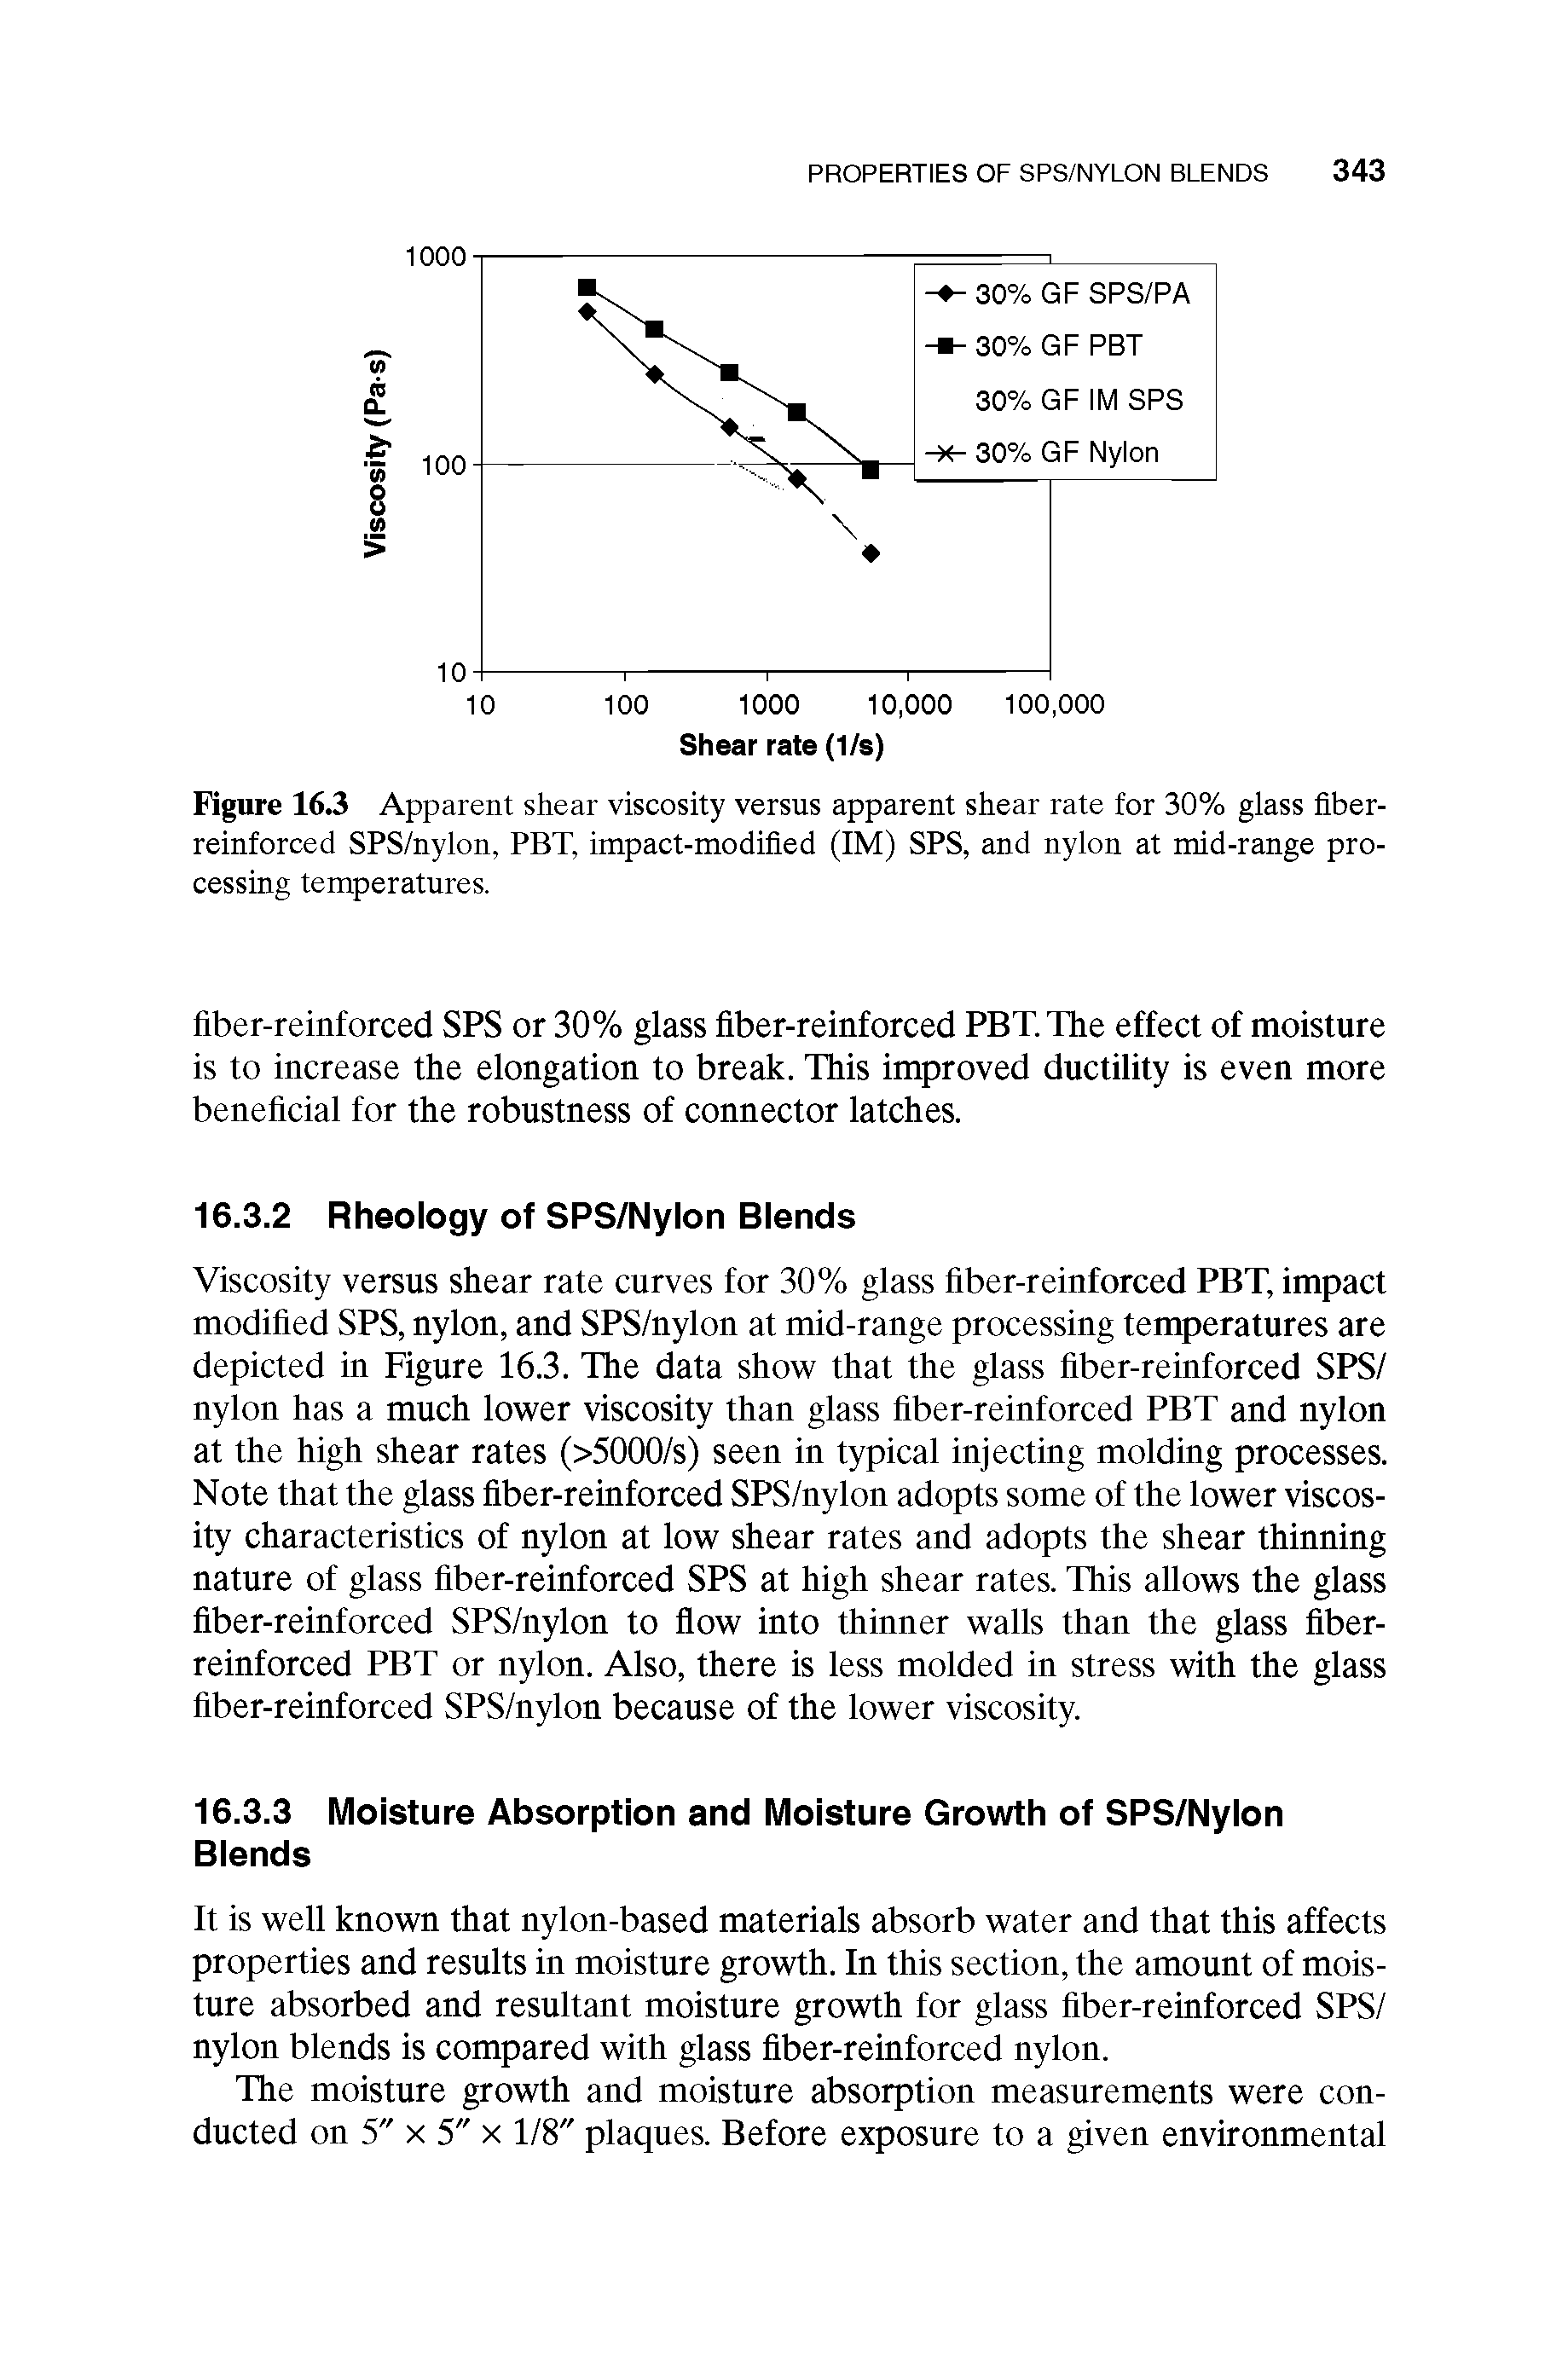 Figure 163 Apparent shear viscosity versus apparent shear rate for 30% glass fiber-reinforced SPS/nylon, PBT, impact-modified (IM) SPS, and nylon at mid-range processing temperatures.